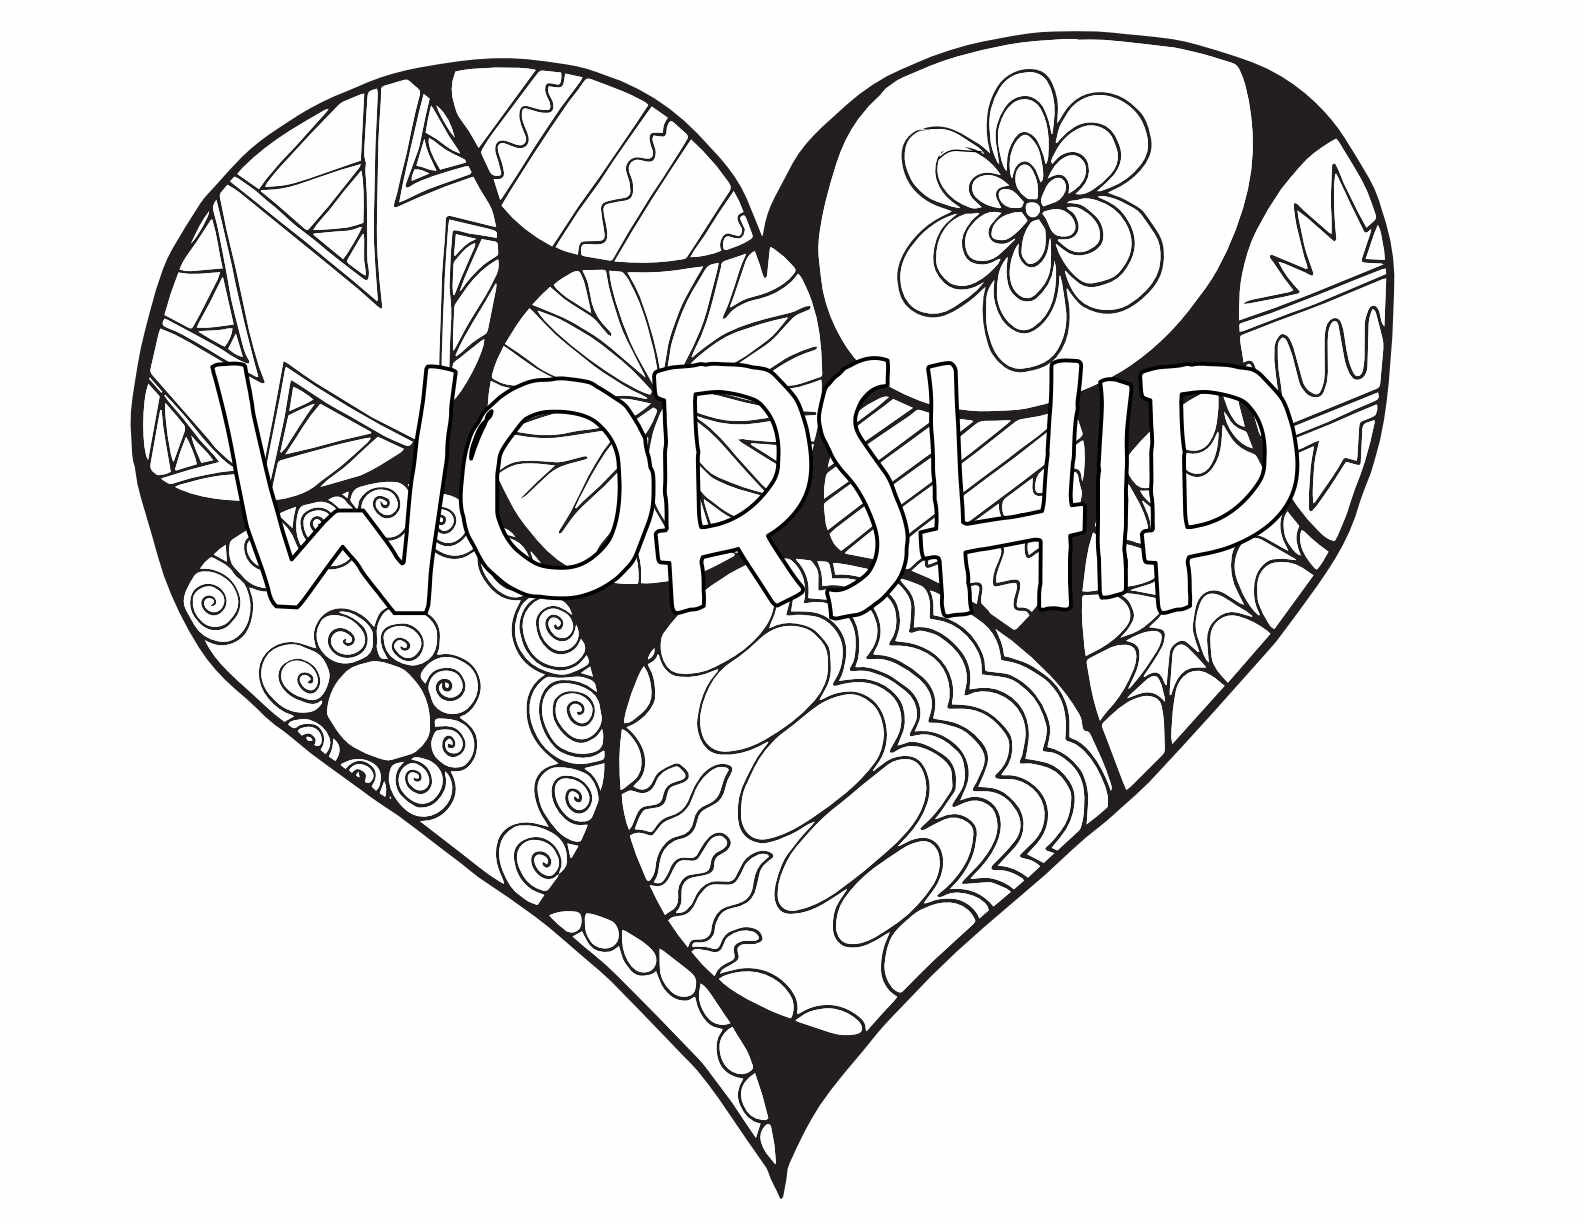 3 FREE WORSHIP PRINTABLE COLORING PAGES CLICK HERE TO DOWNLOAD THE PAGE ABOVE